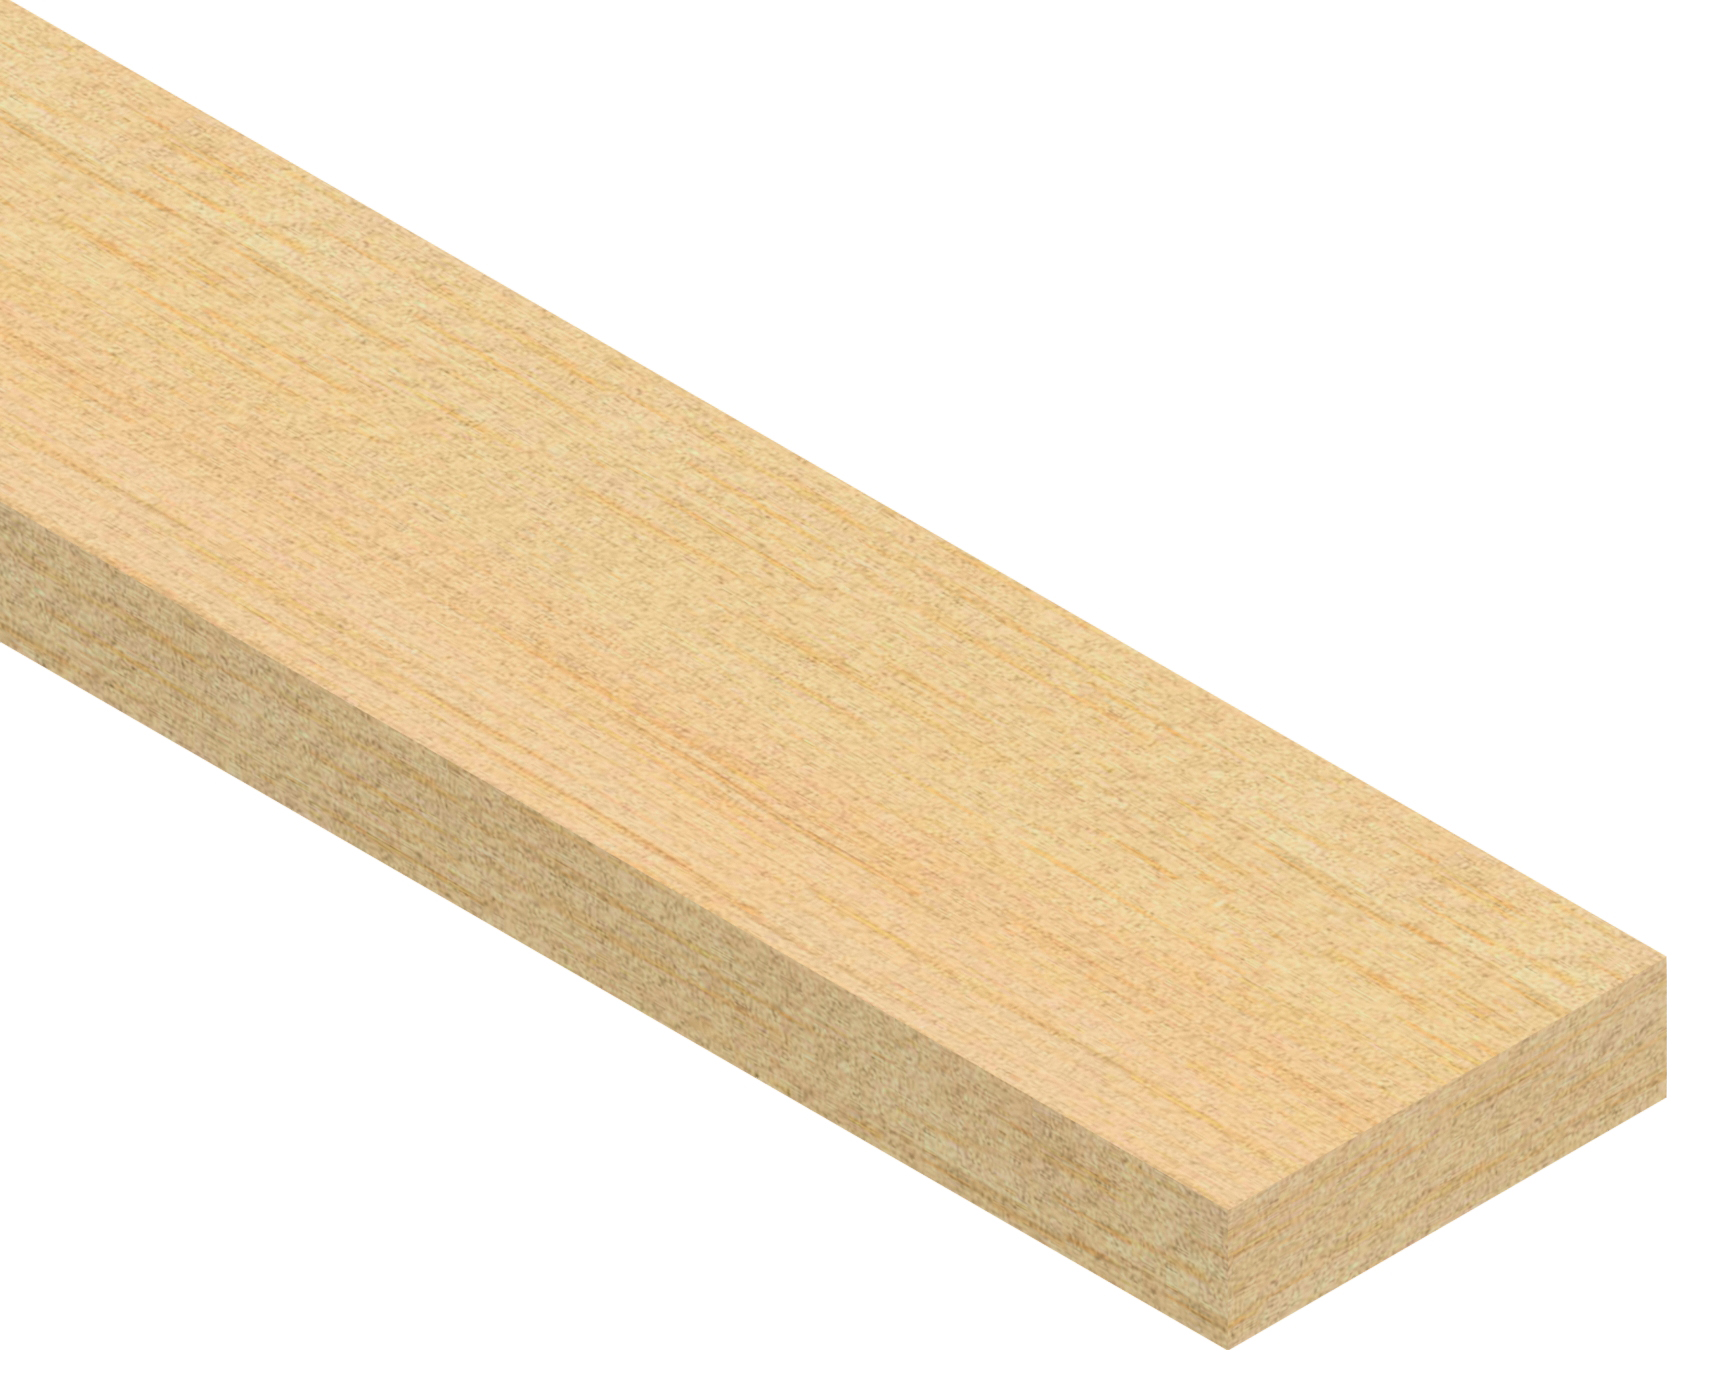 Image of Cheshire Mouldings Pine Stripwood - 10 x 36 x 900mm